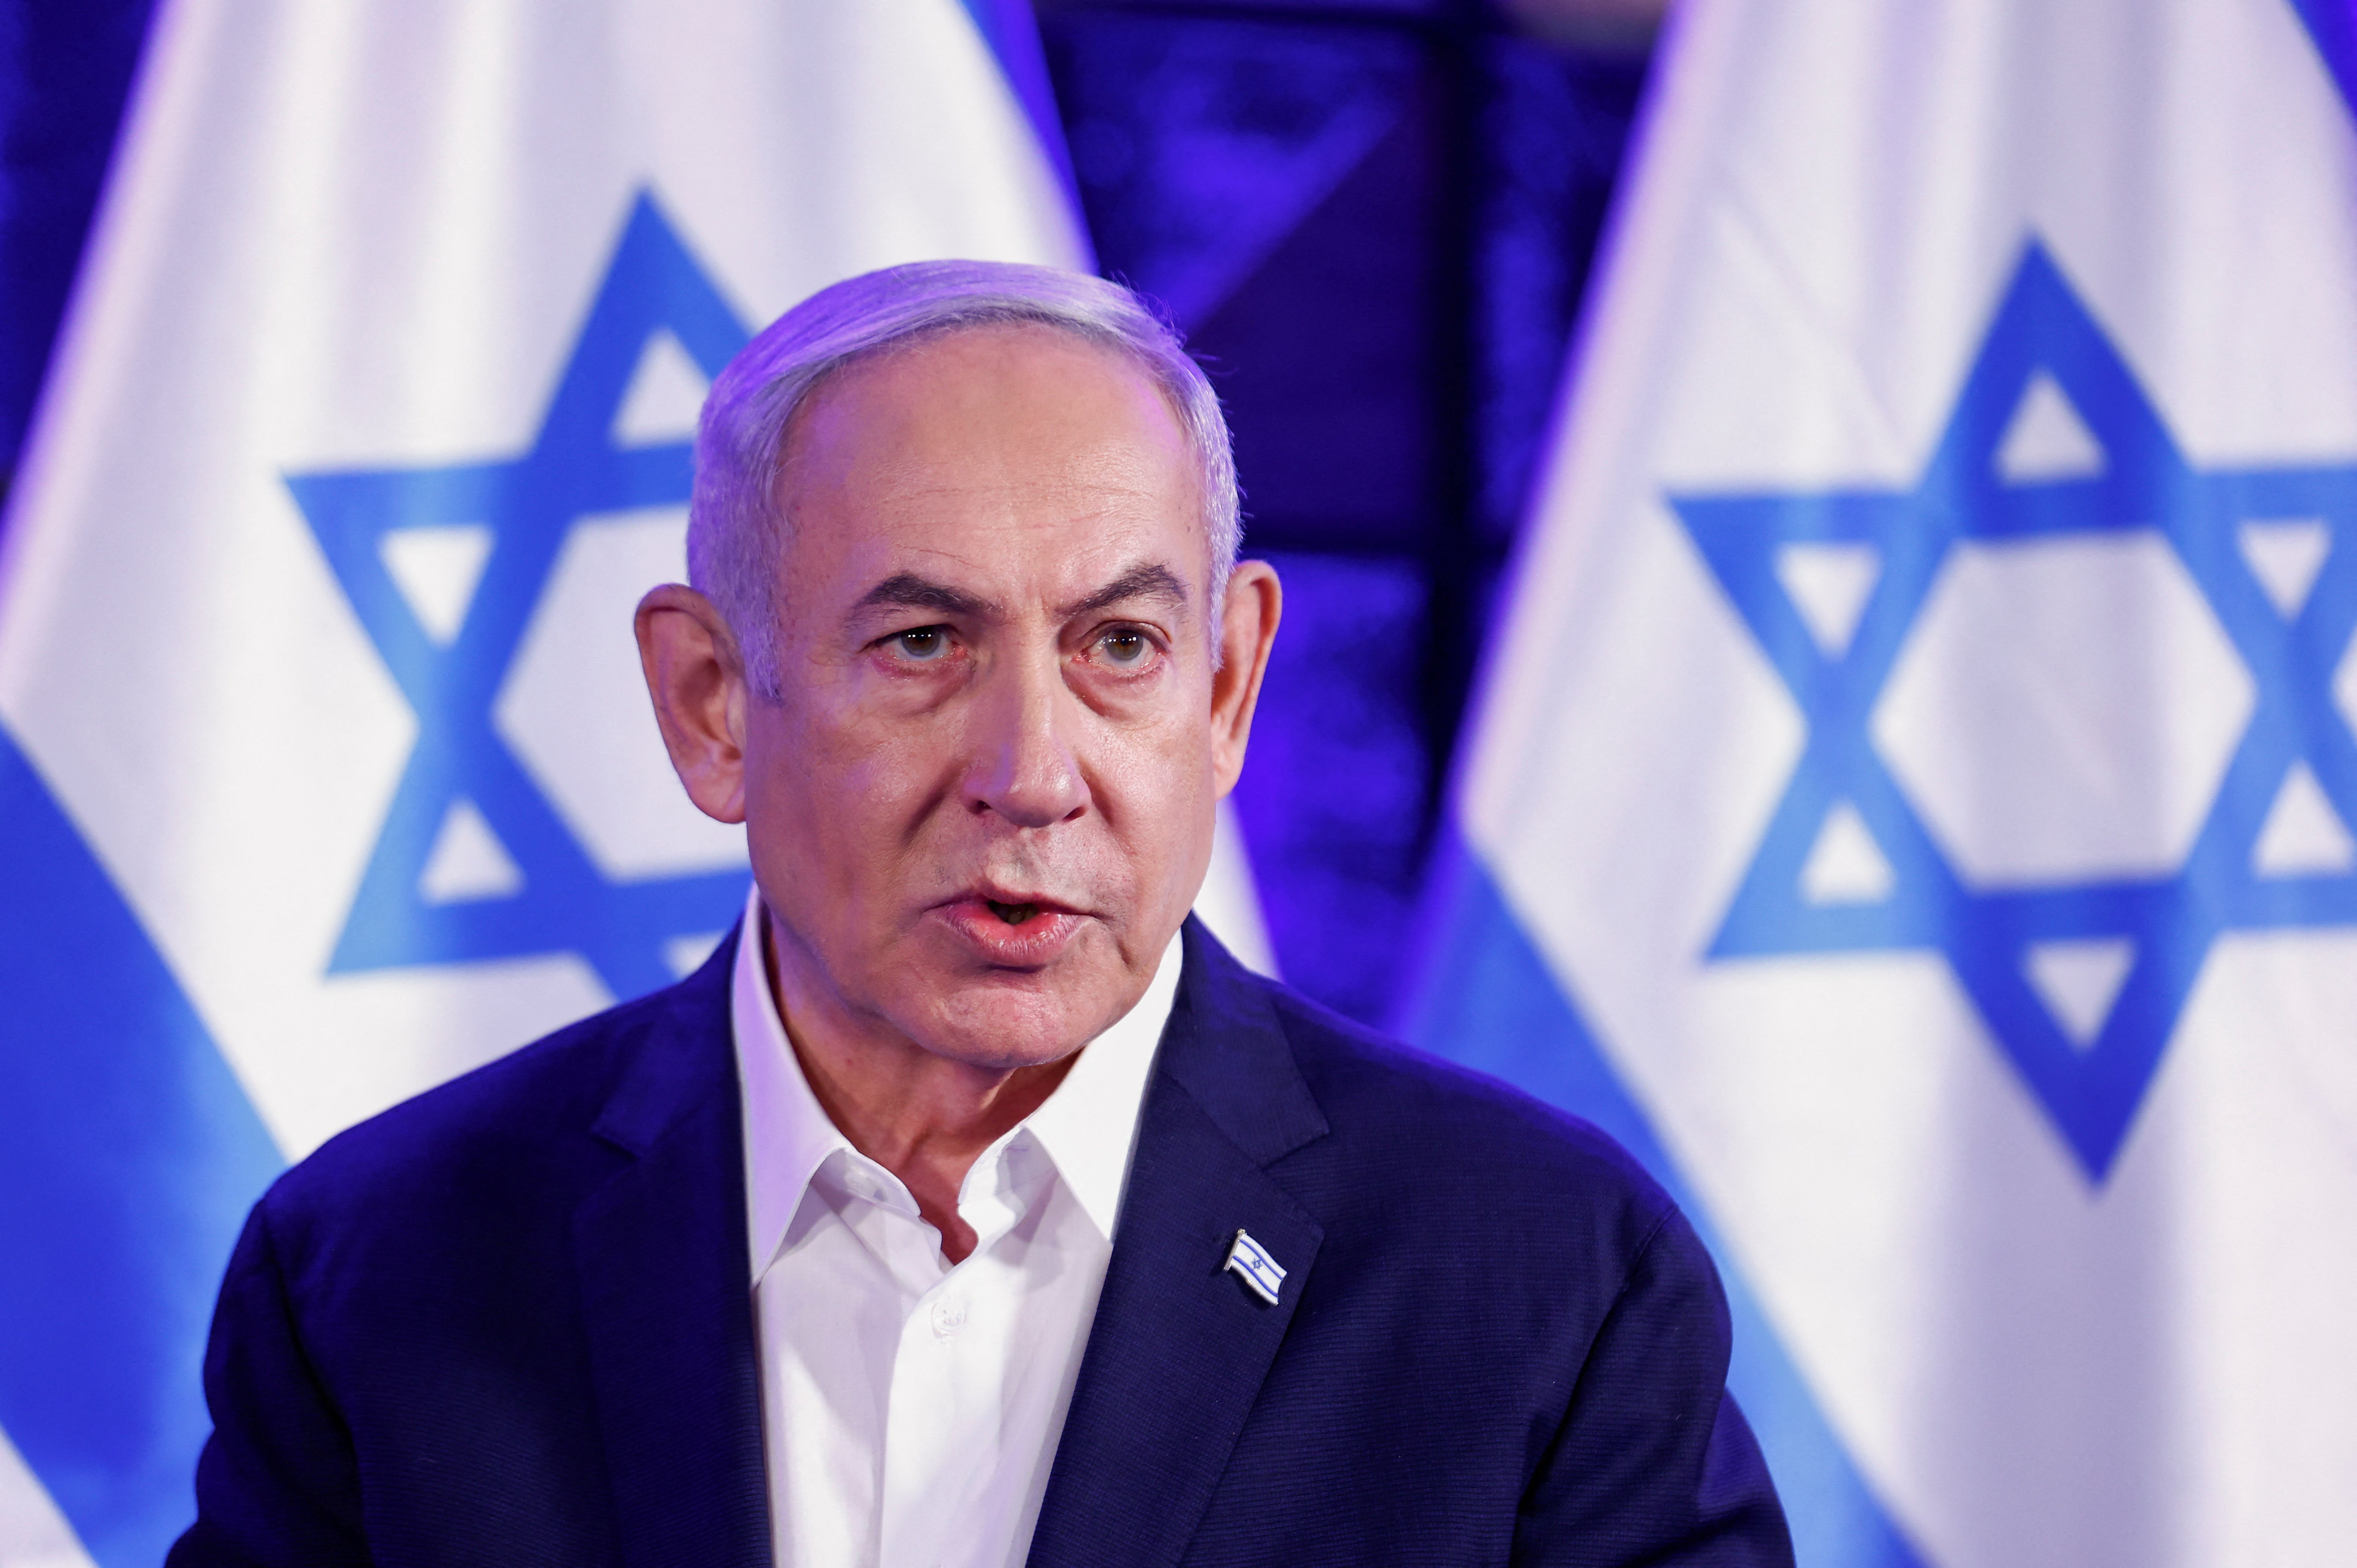 Israel’s prime minister is a veteran politician, and he and Joe Biden know each other well